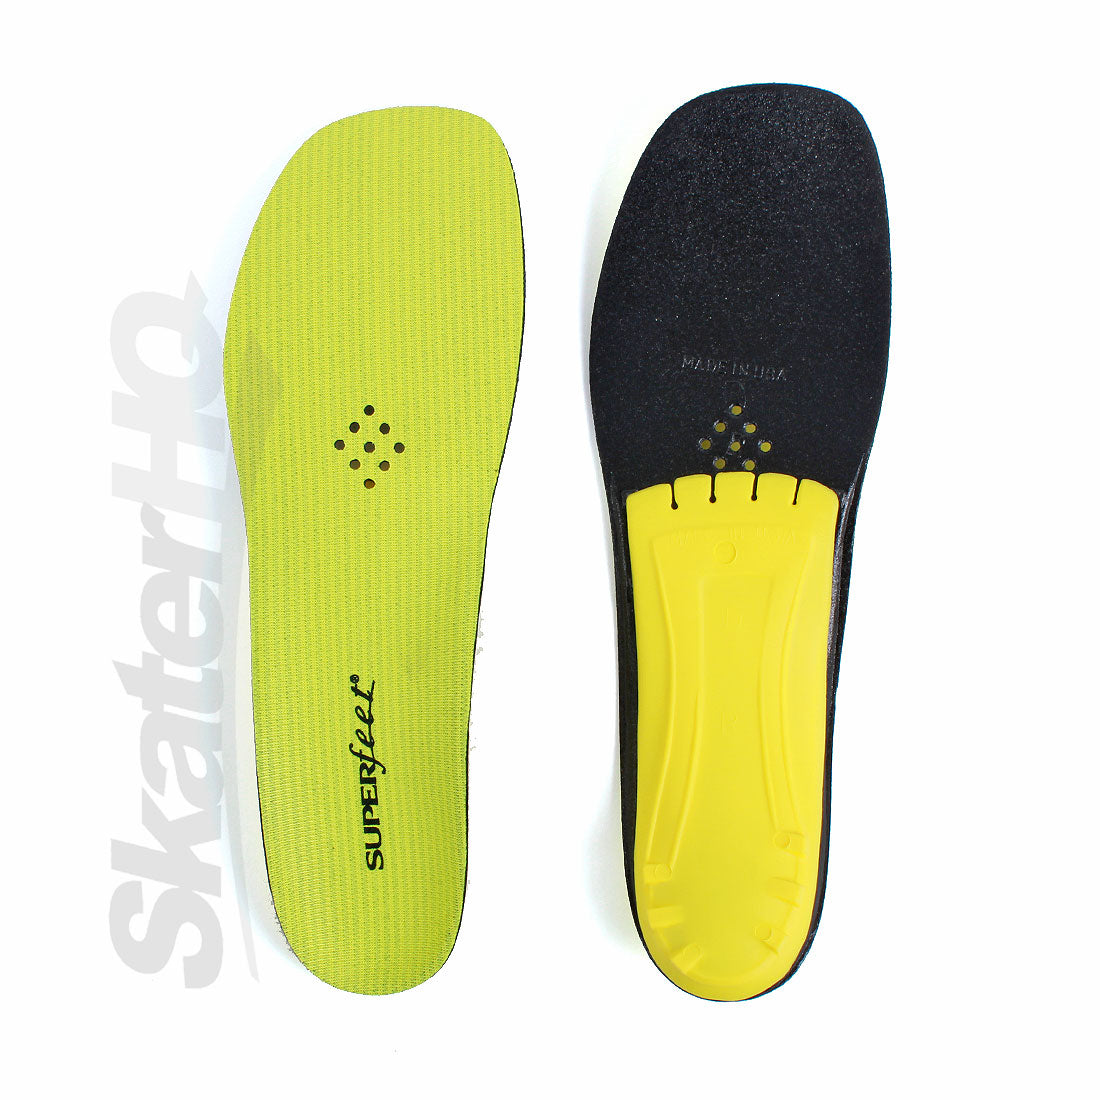 Insole Superfeet Yellow Skate Sz E Insoles and Fitting Aids